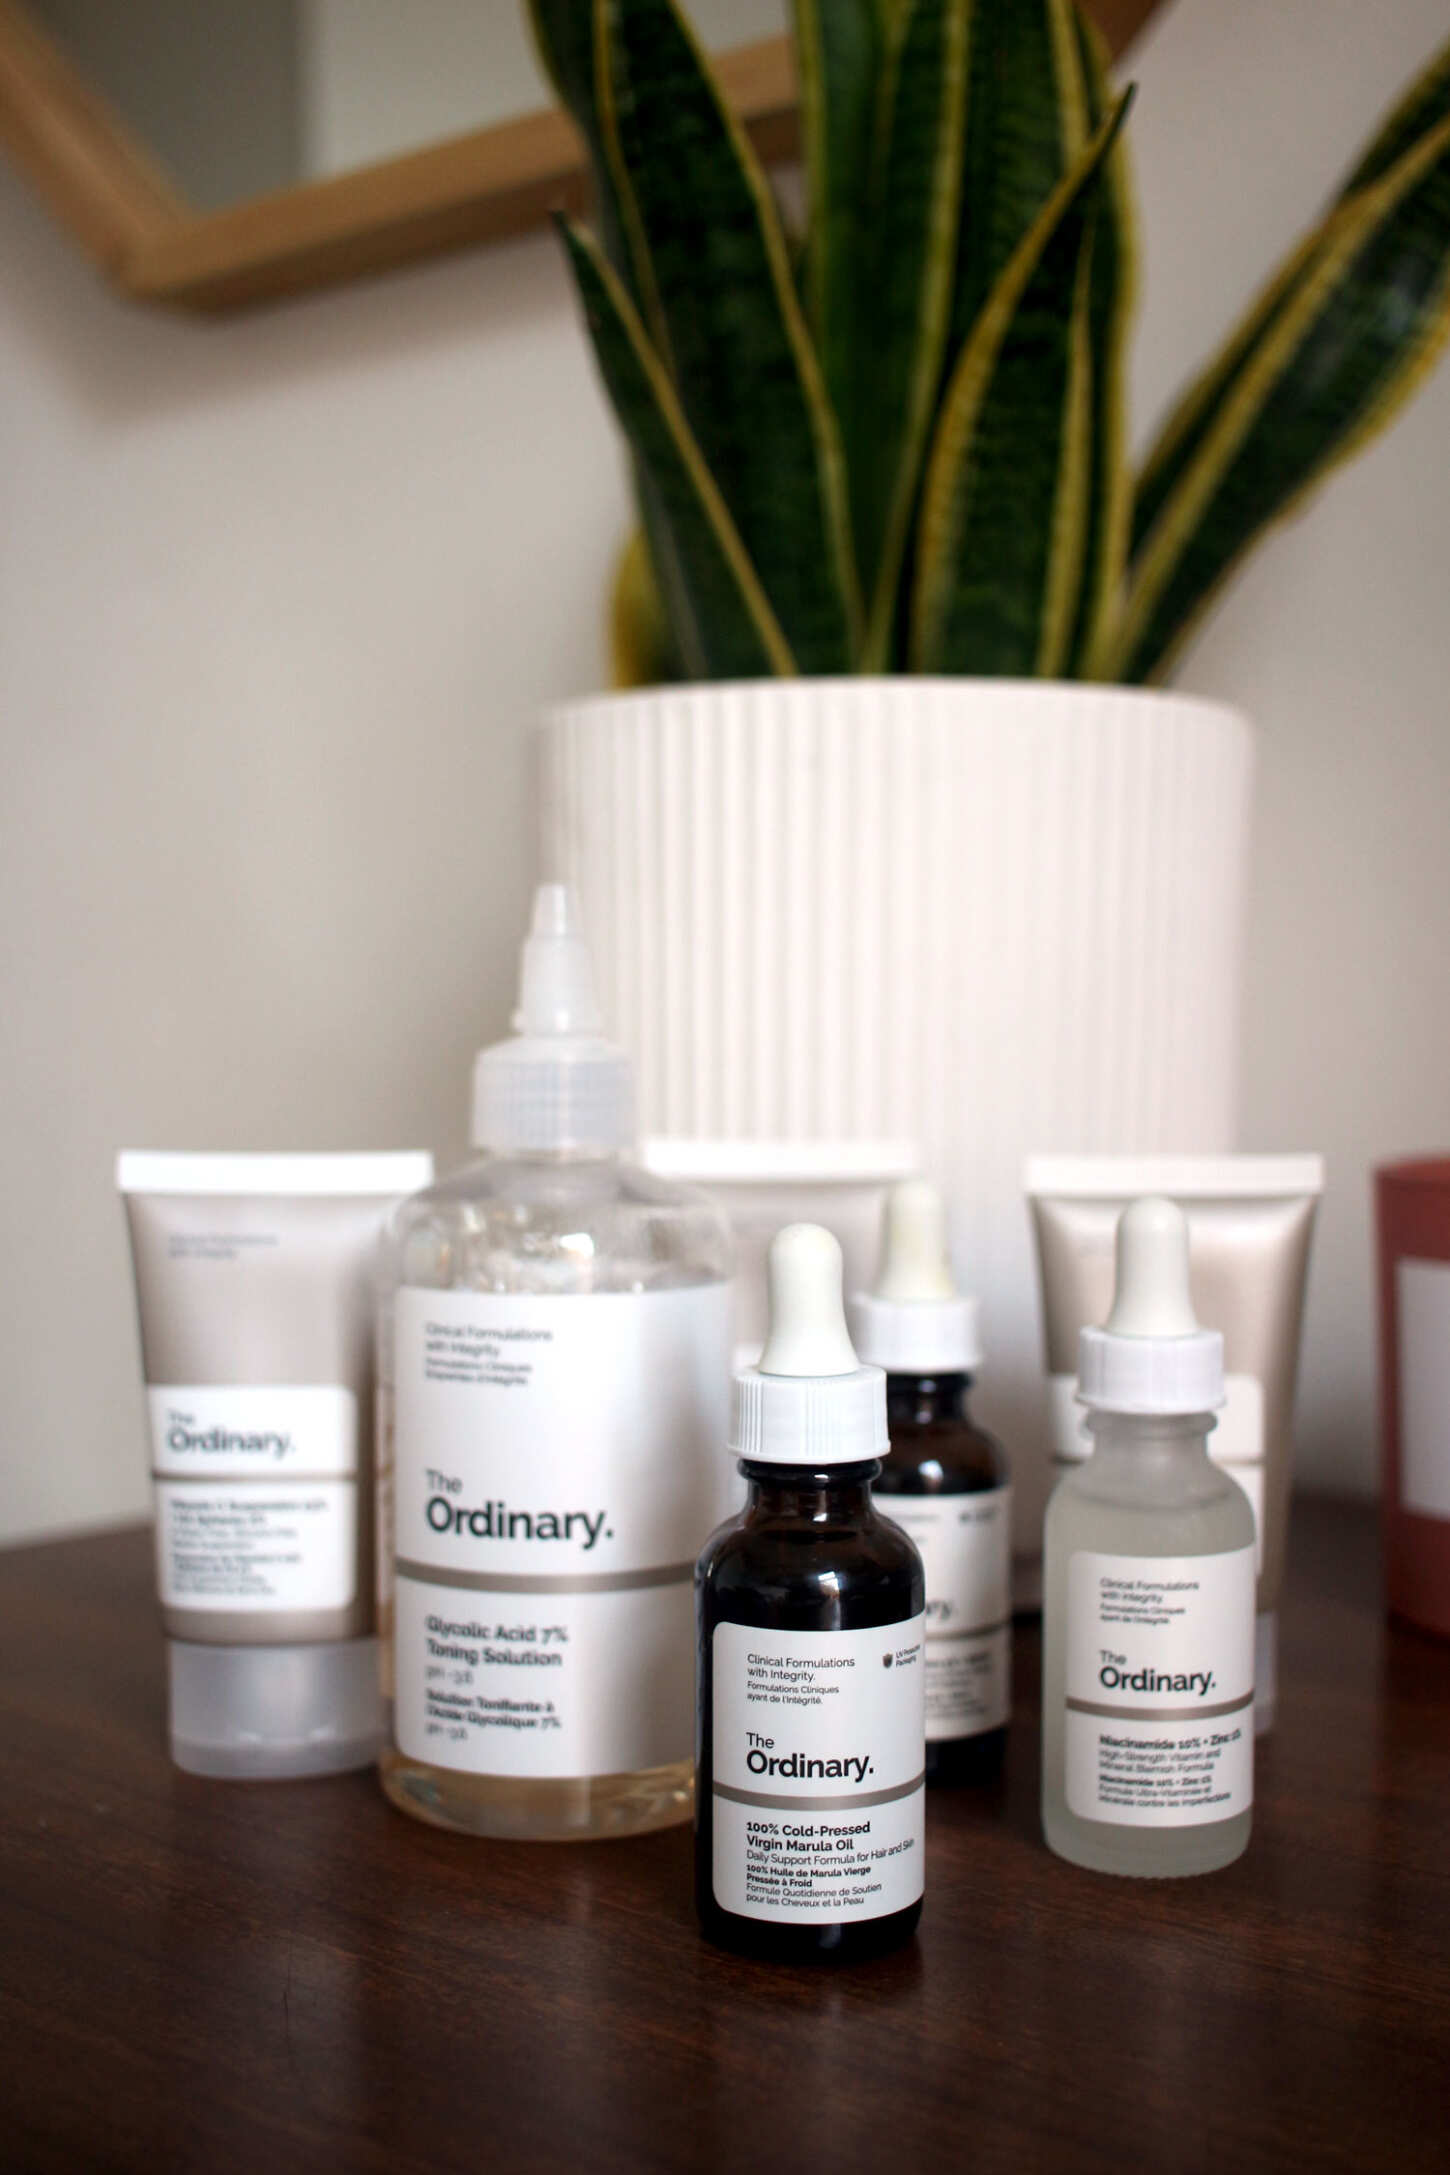 The-Ordinary-skincare-overview-beauty-review